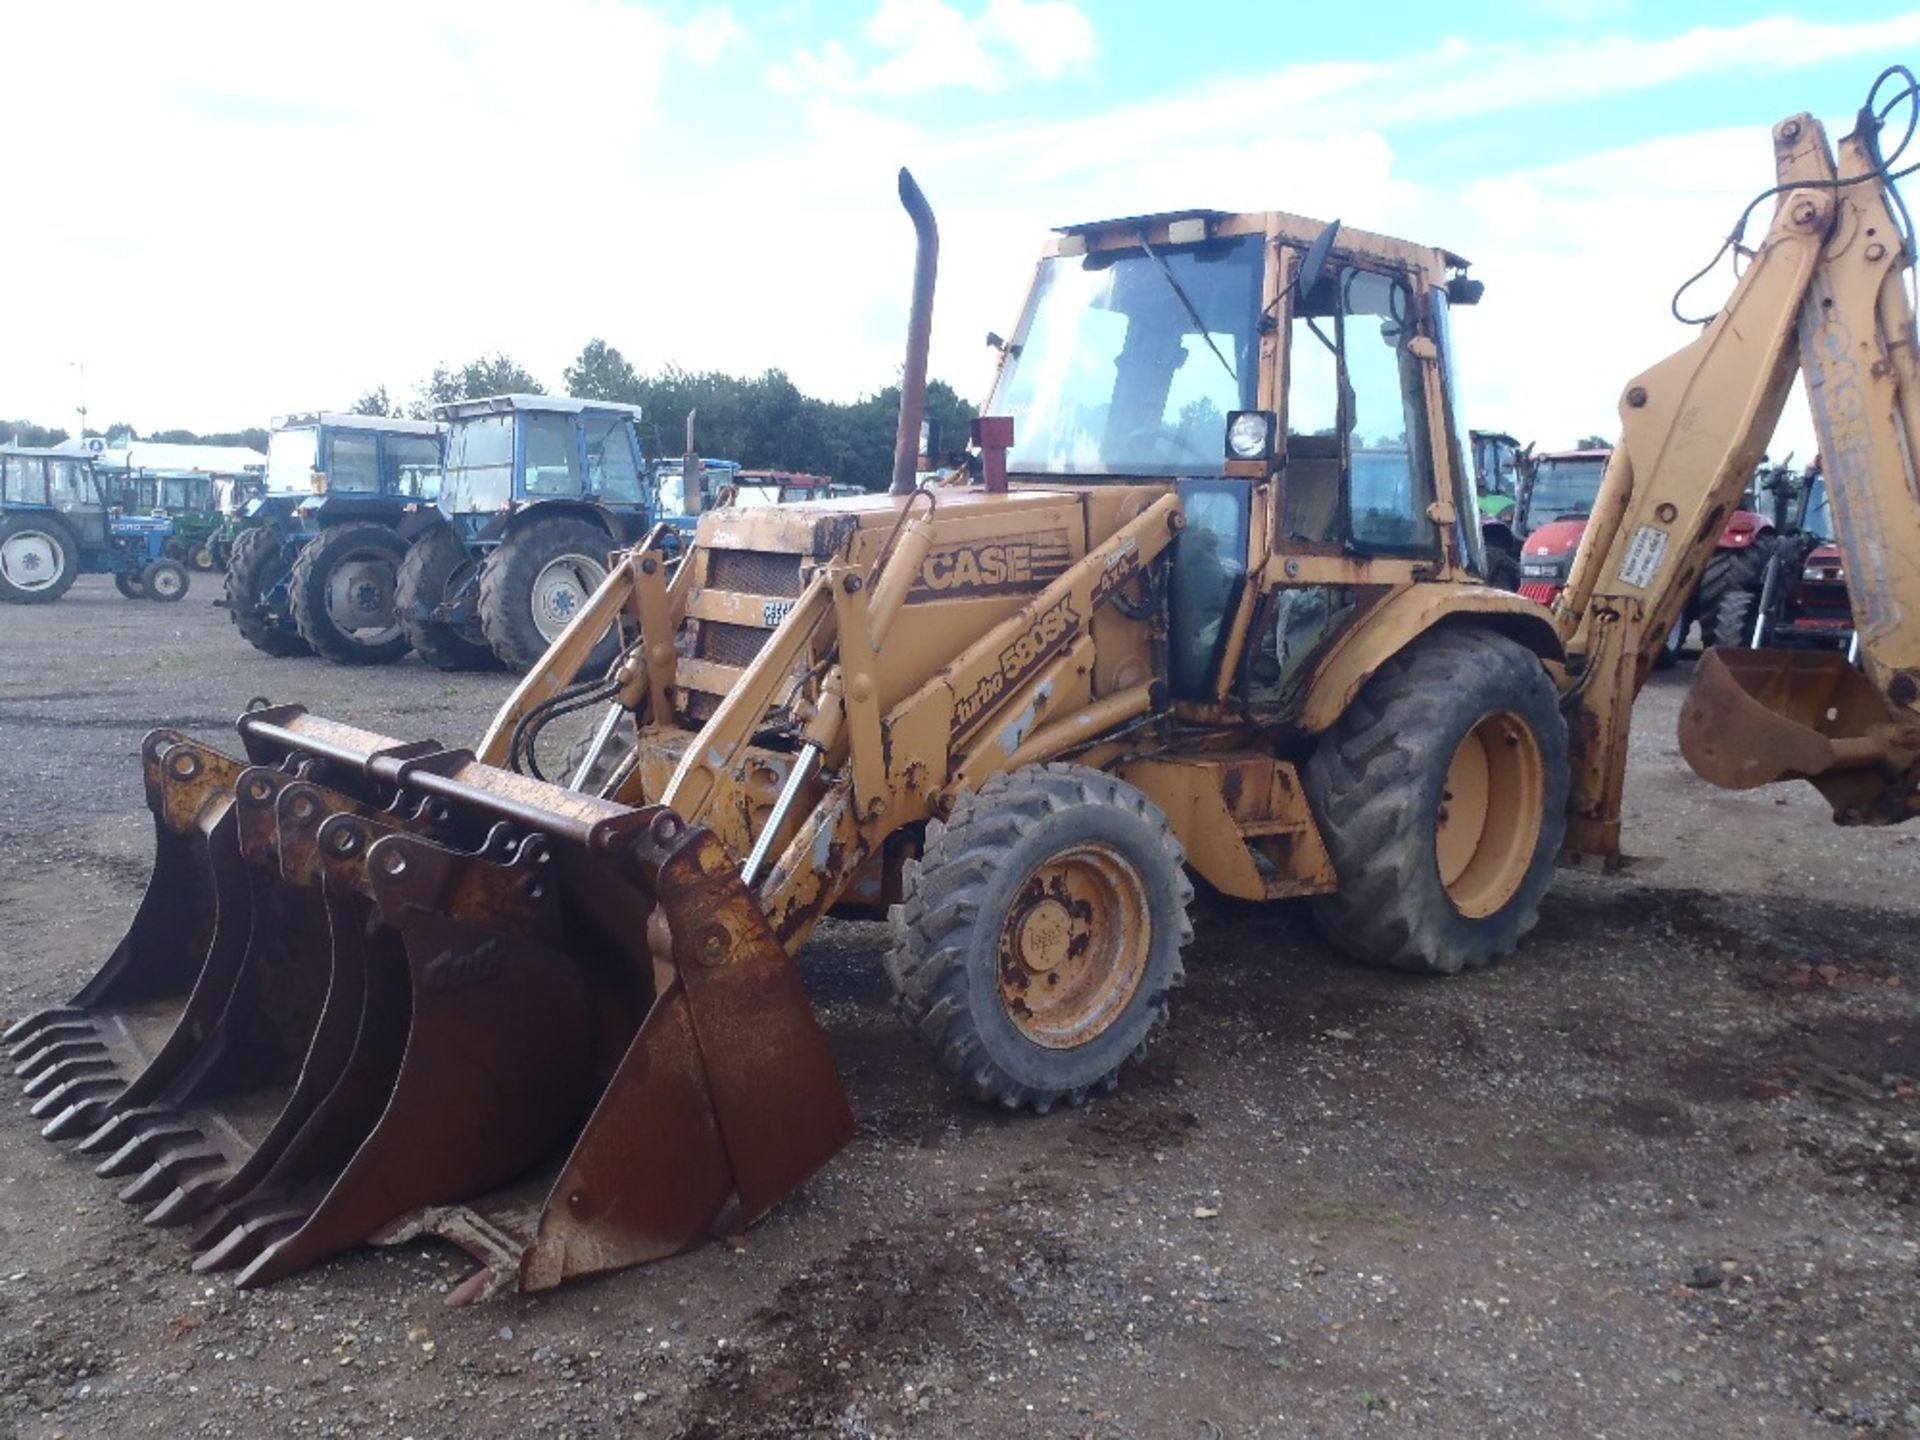 1992 Case 580 Super K Turbo 4wd Full Spec Digger with 4 in 1 Bucket, Extender Rear Hoe - Image 2 of 4